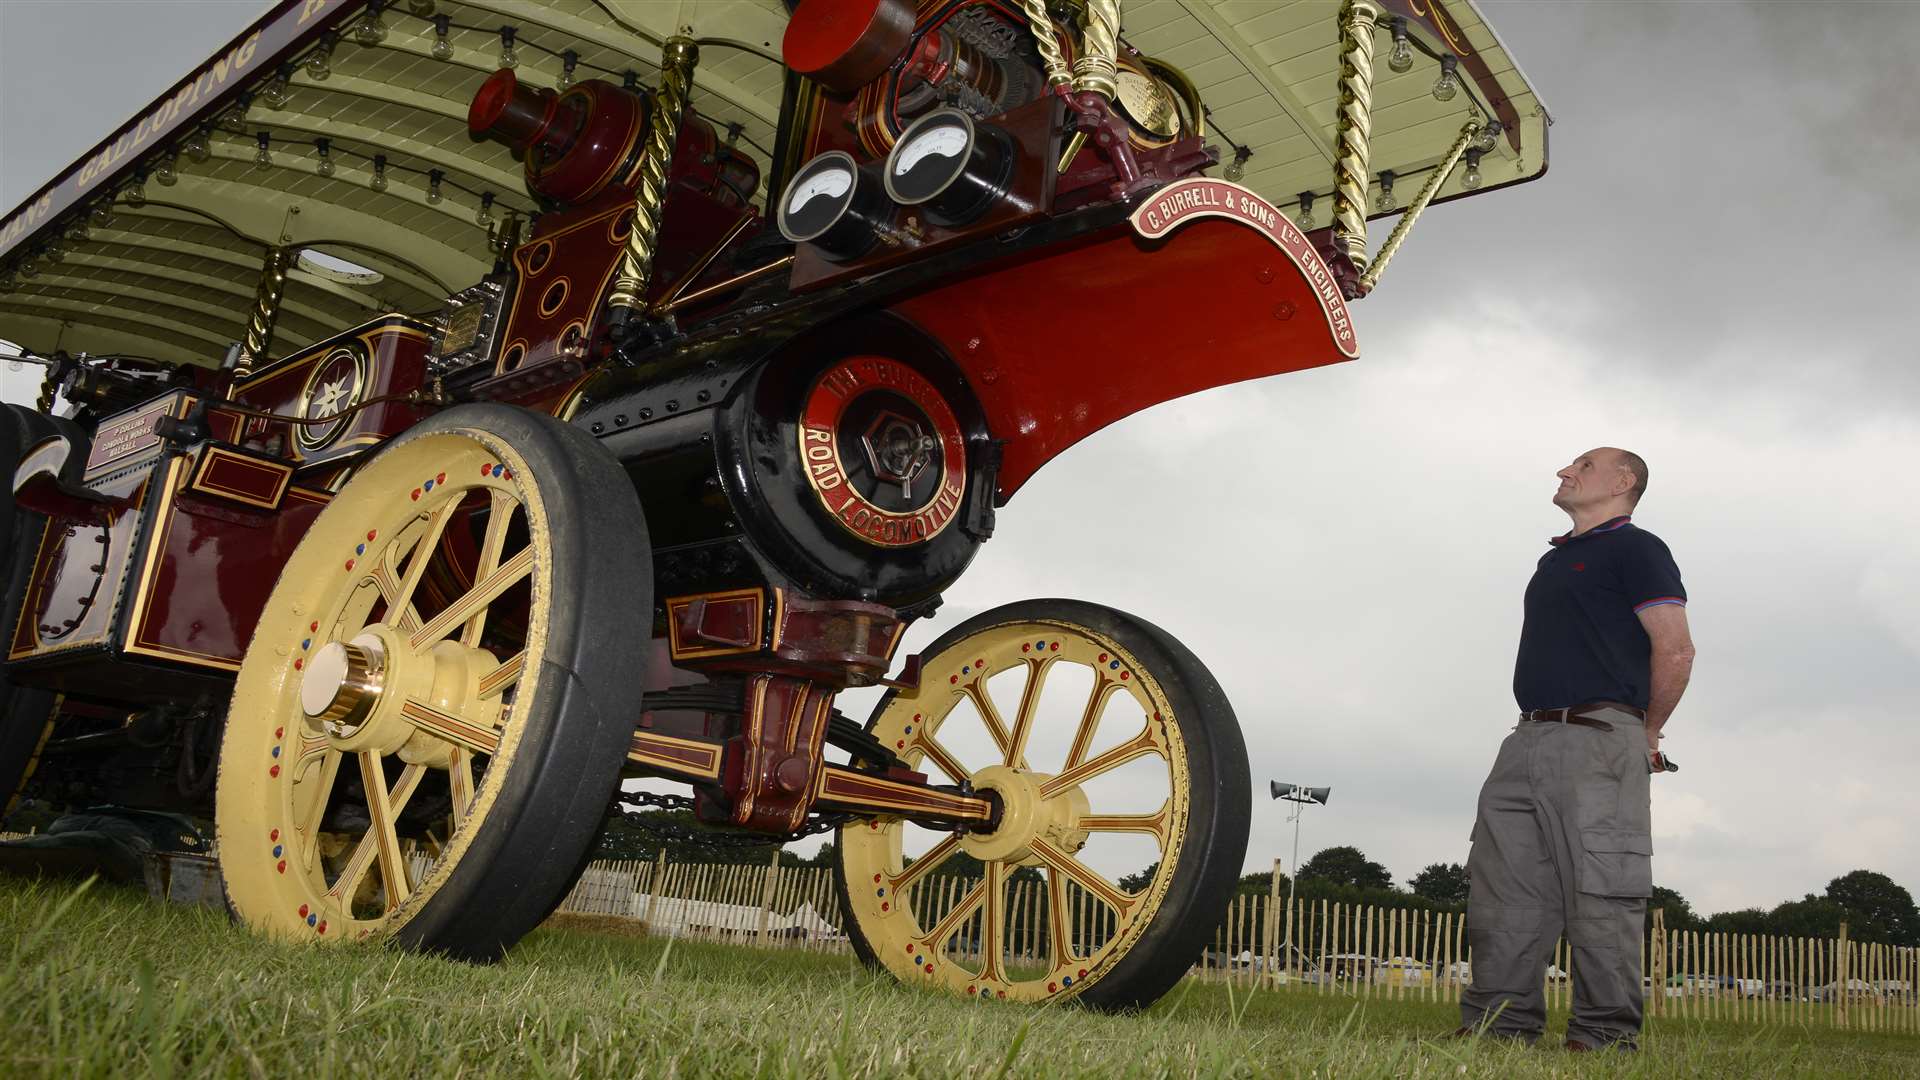 The steam rally is held in Woodchurch